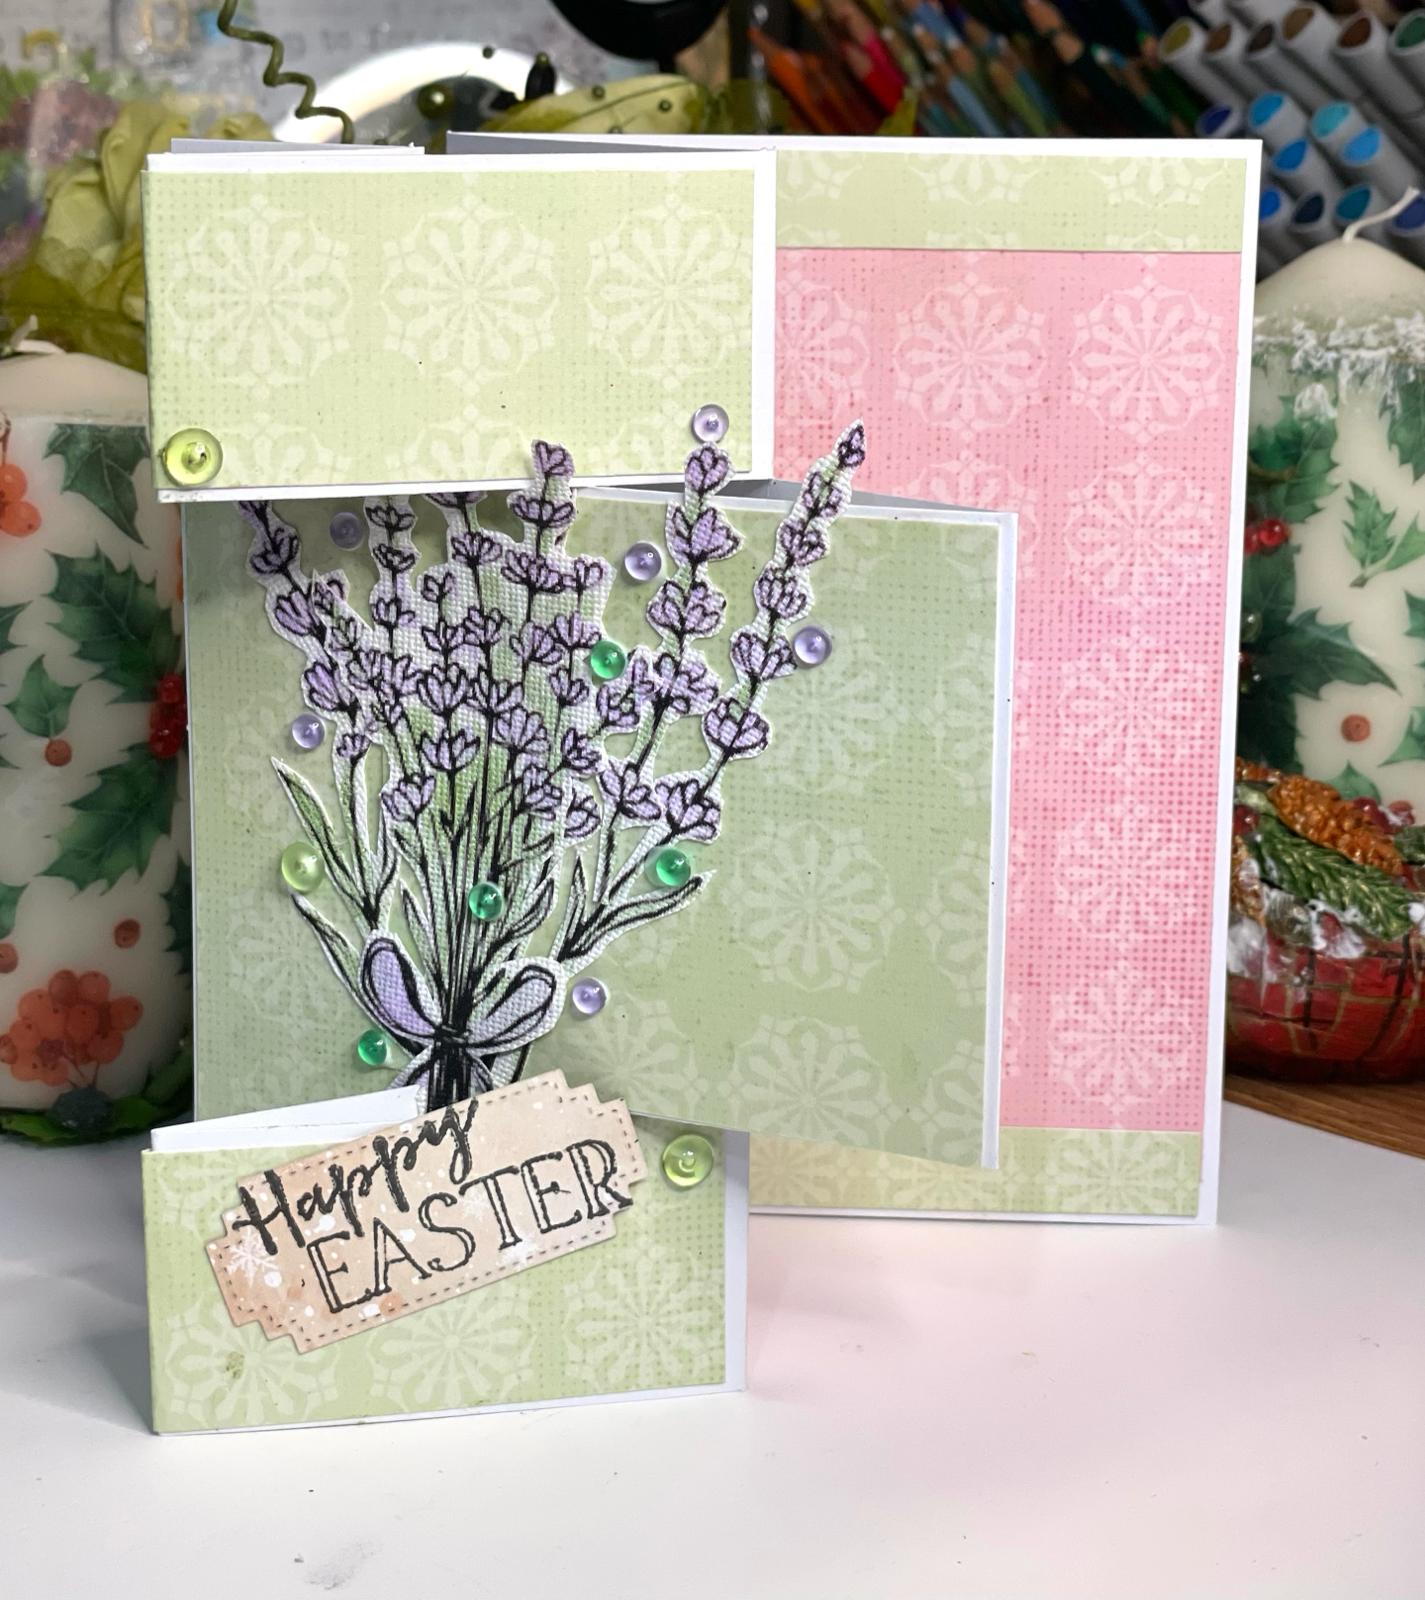 Final Look of the Happy Easter Greeting Card